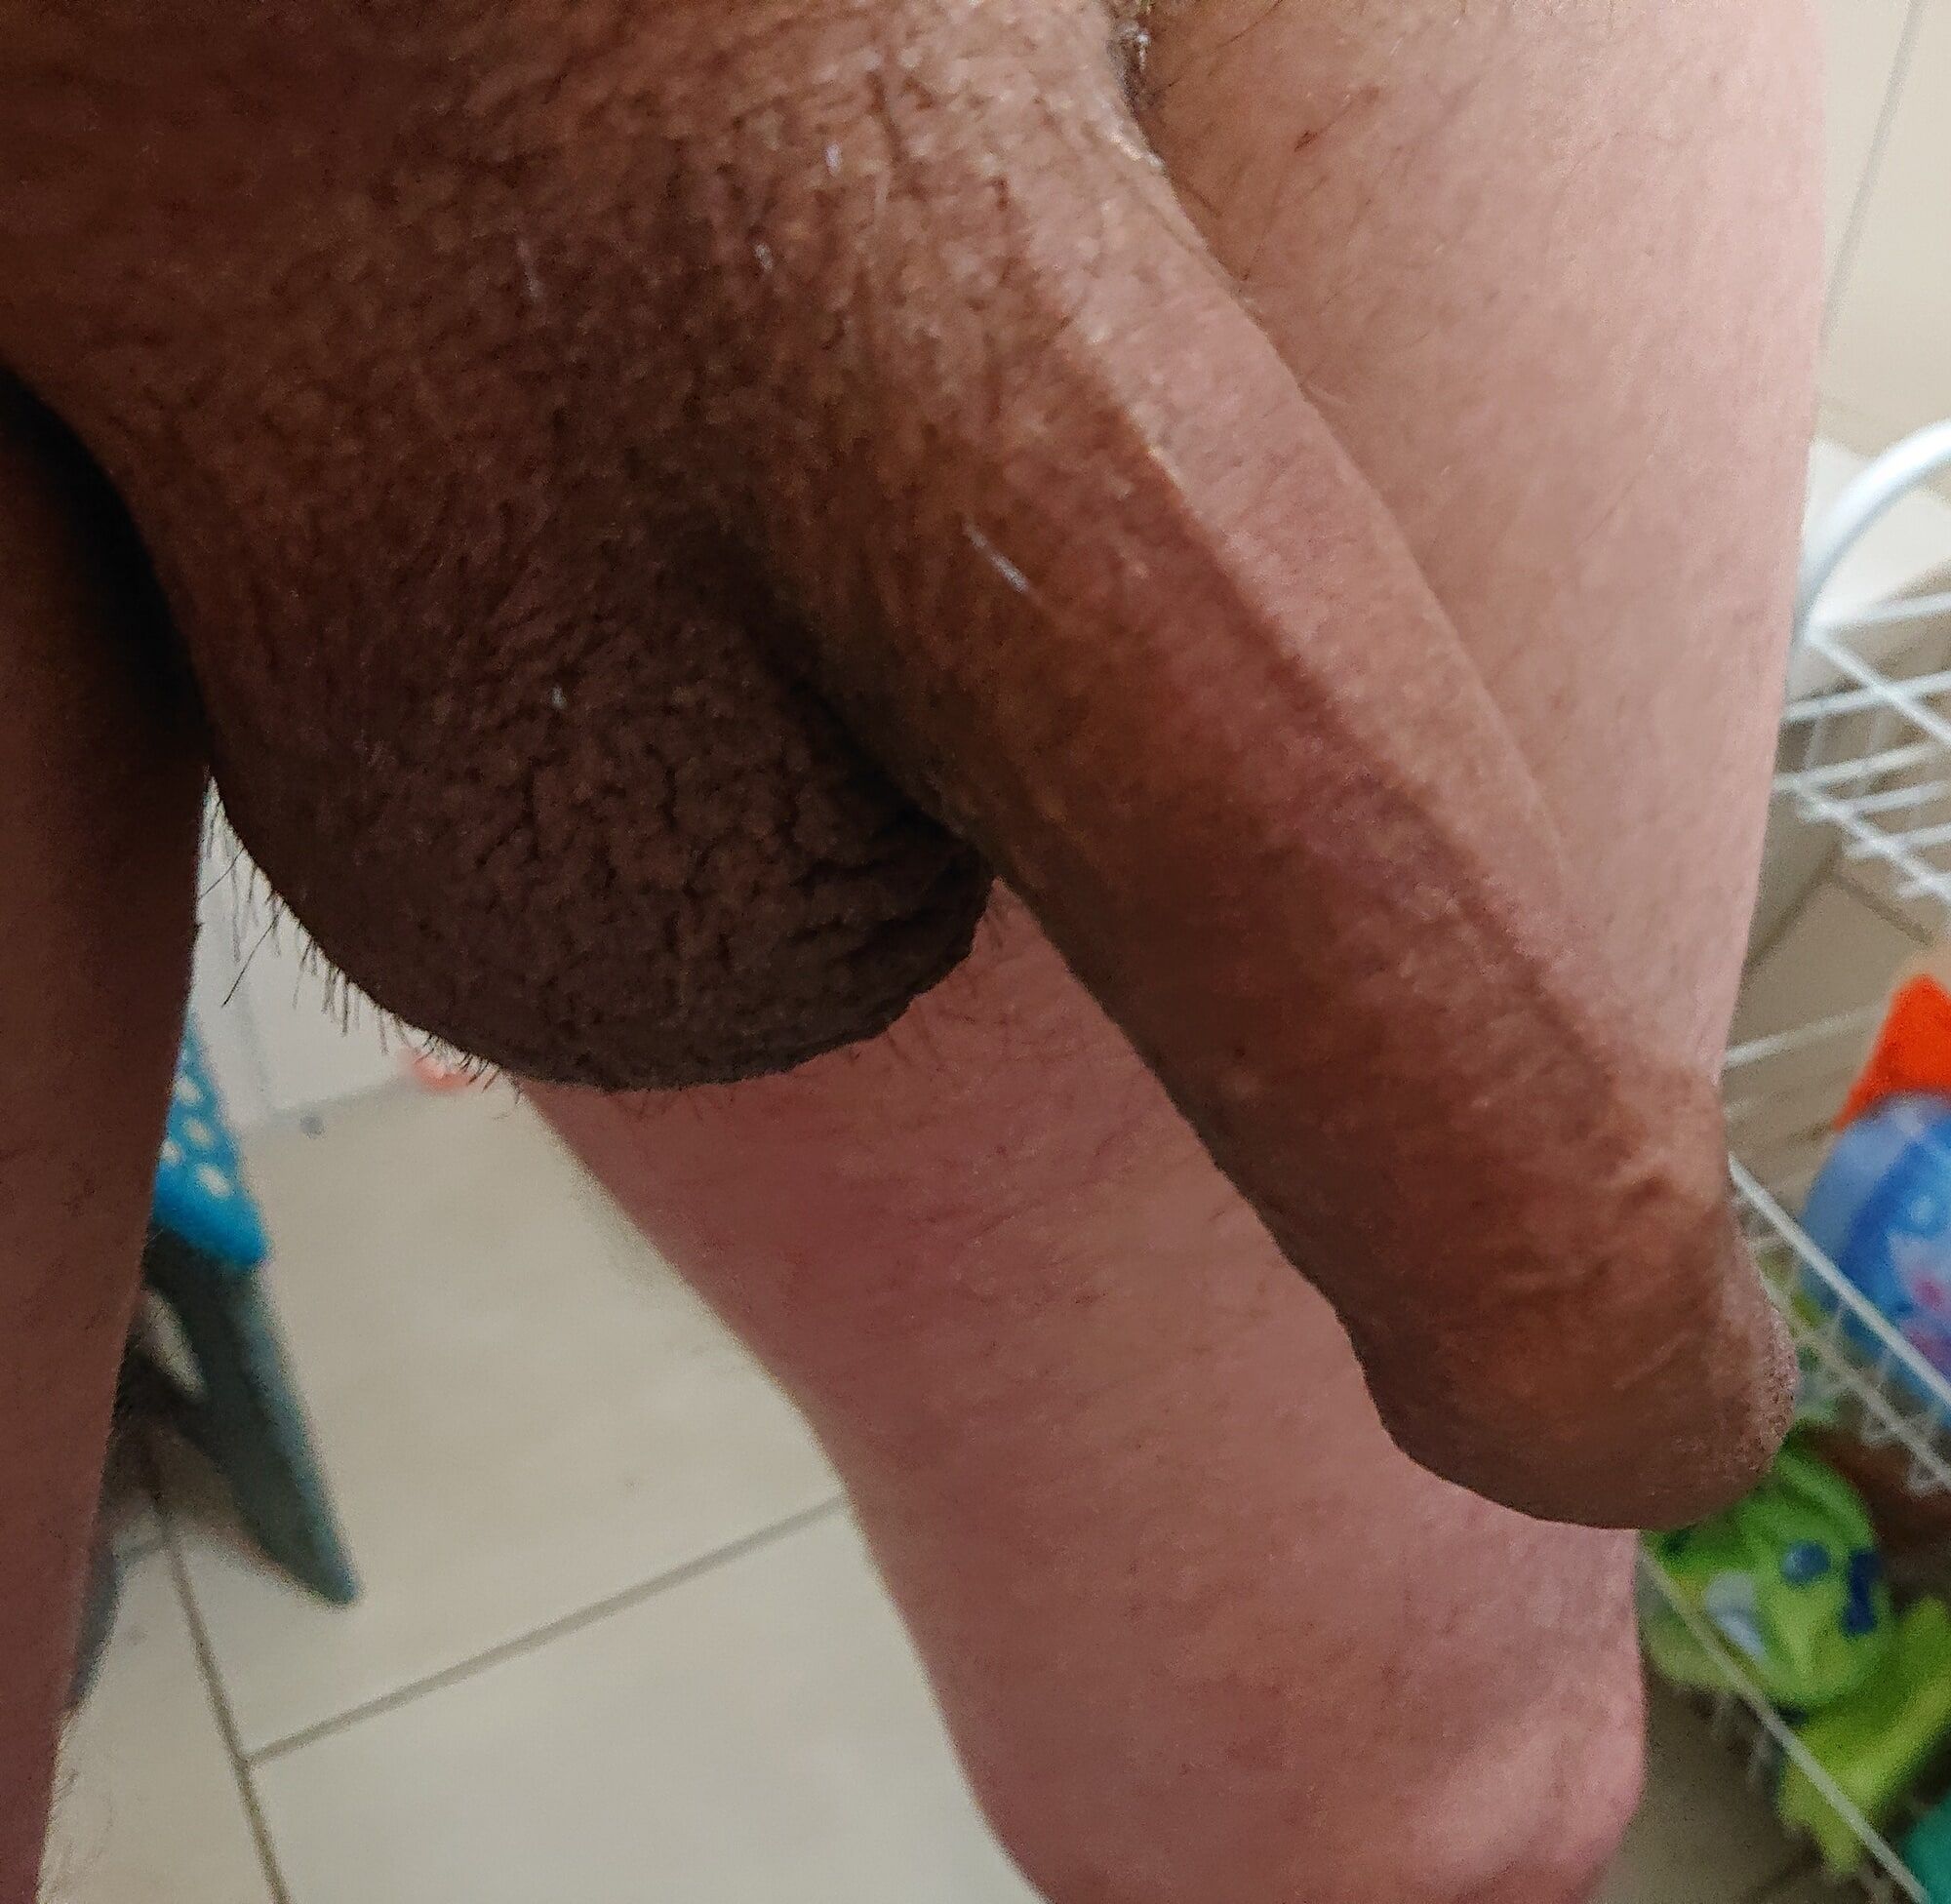 My Penis and Hole #10